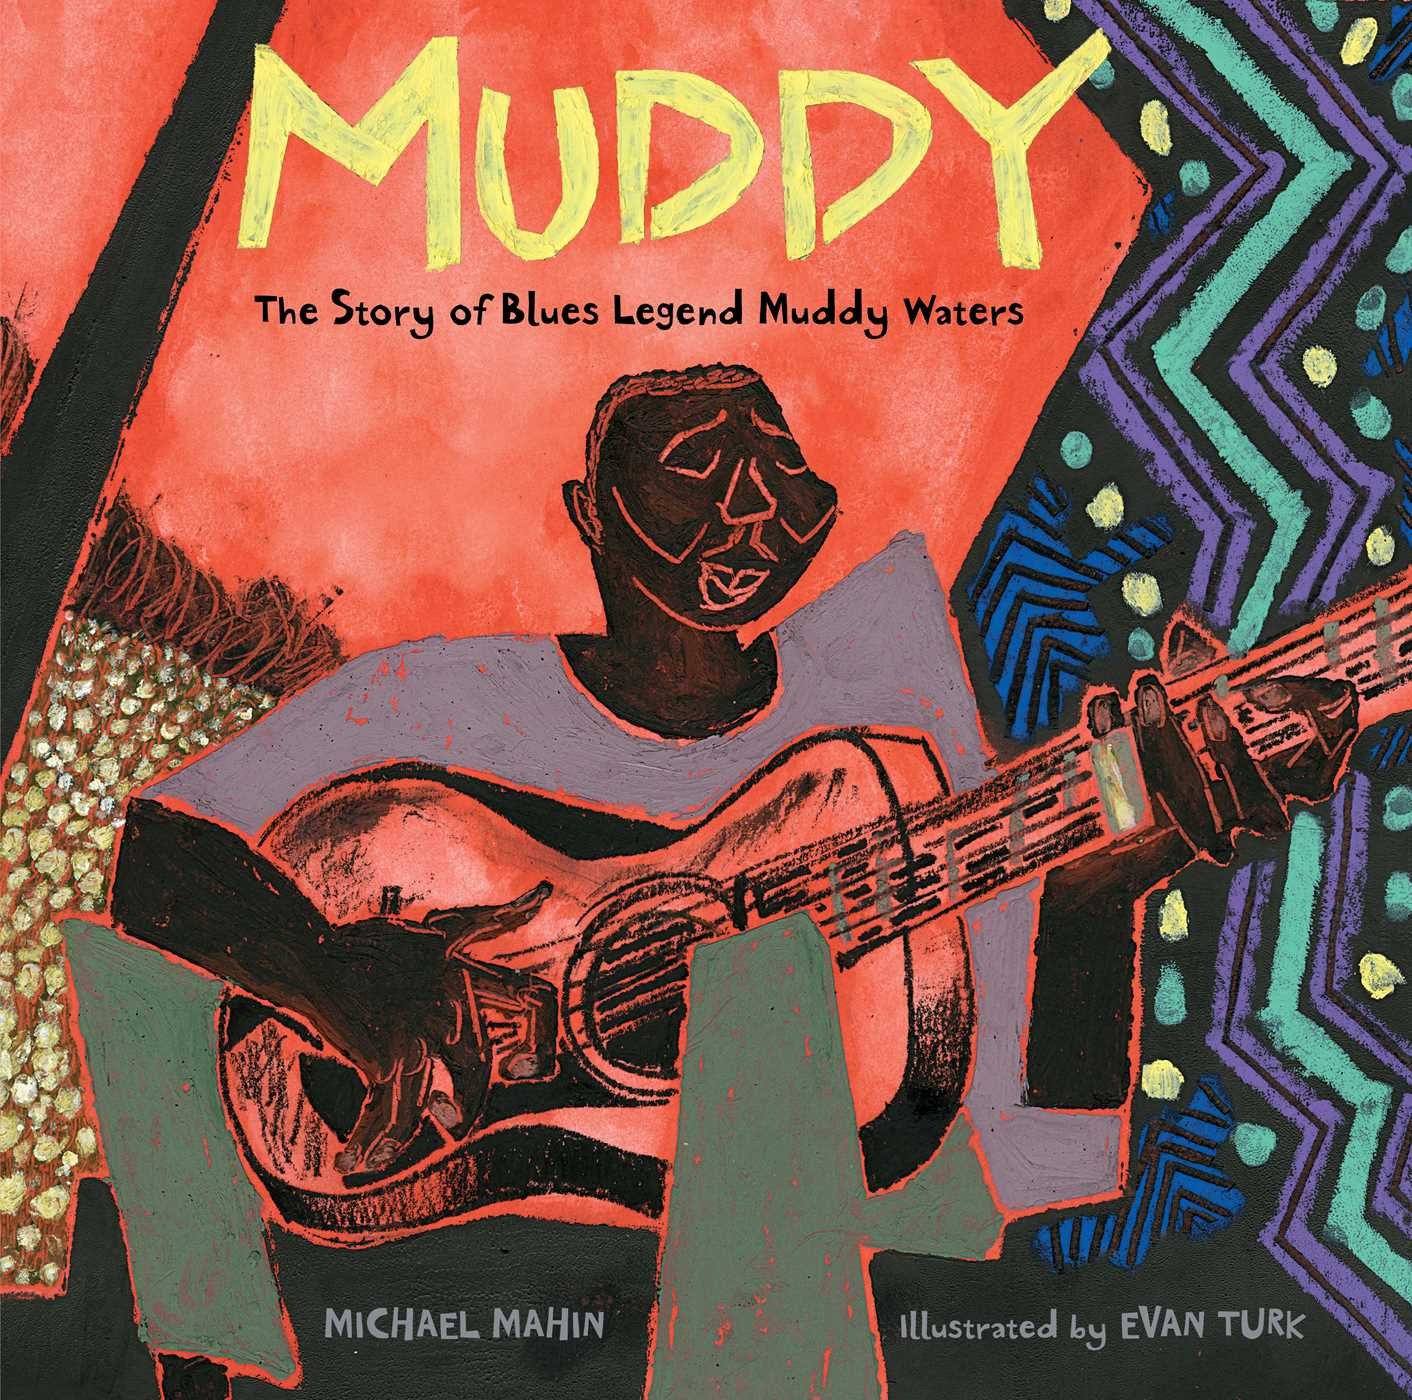 Muddy: The Story of Blues Legend Muddy Waters - Me Books Asia Store